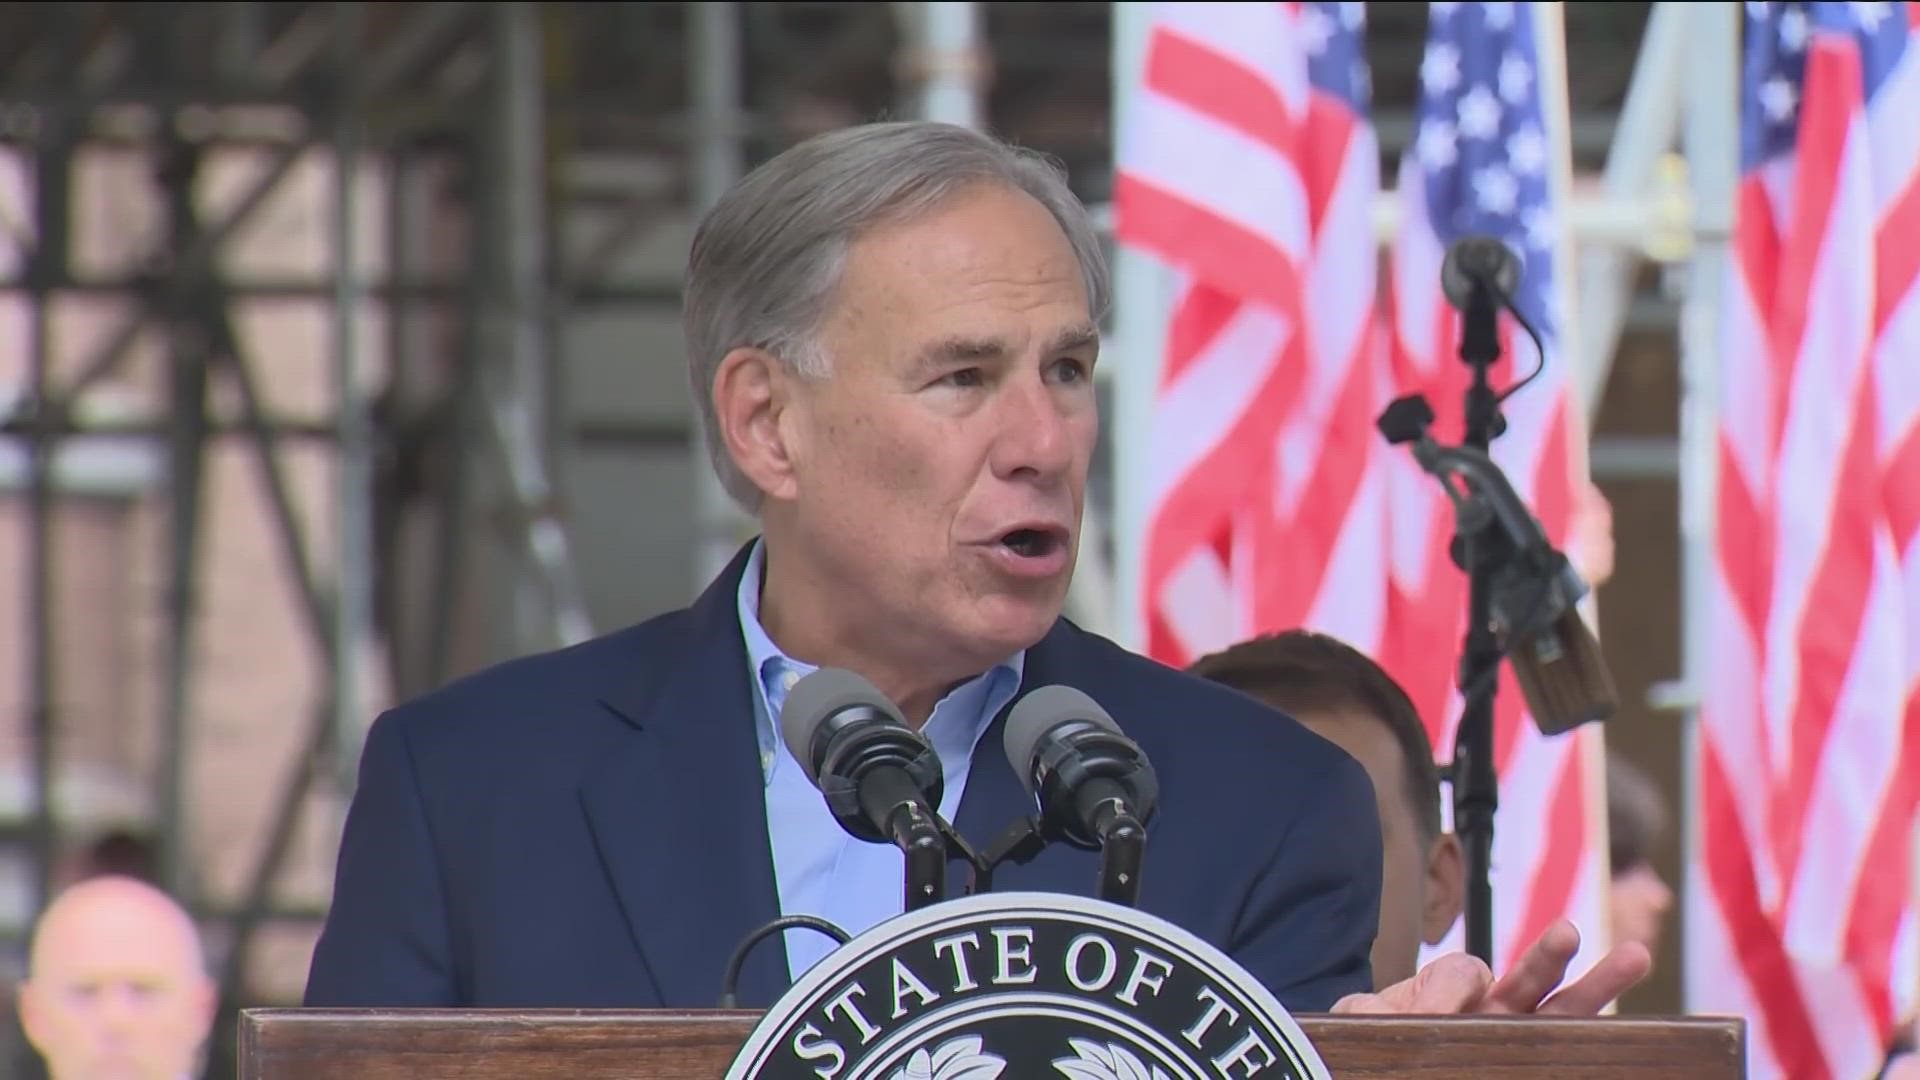 Hundreds of people gathered at the Texas State Capitol on Saturday for the Rally for Life, including Gov. Greg Abbott.